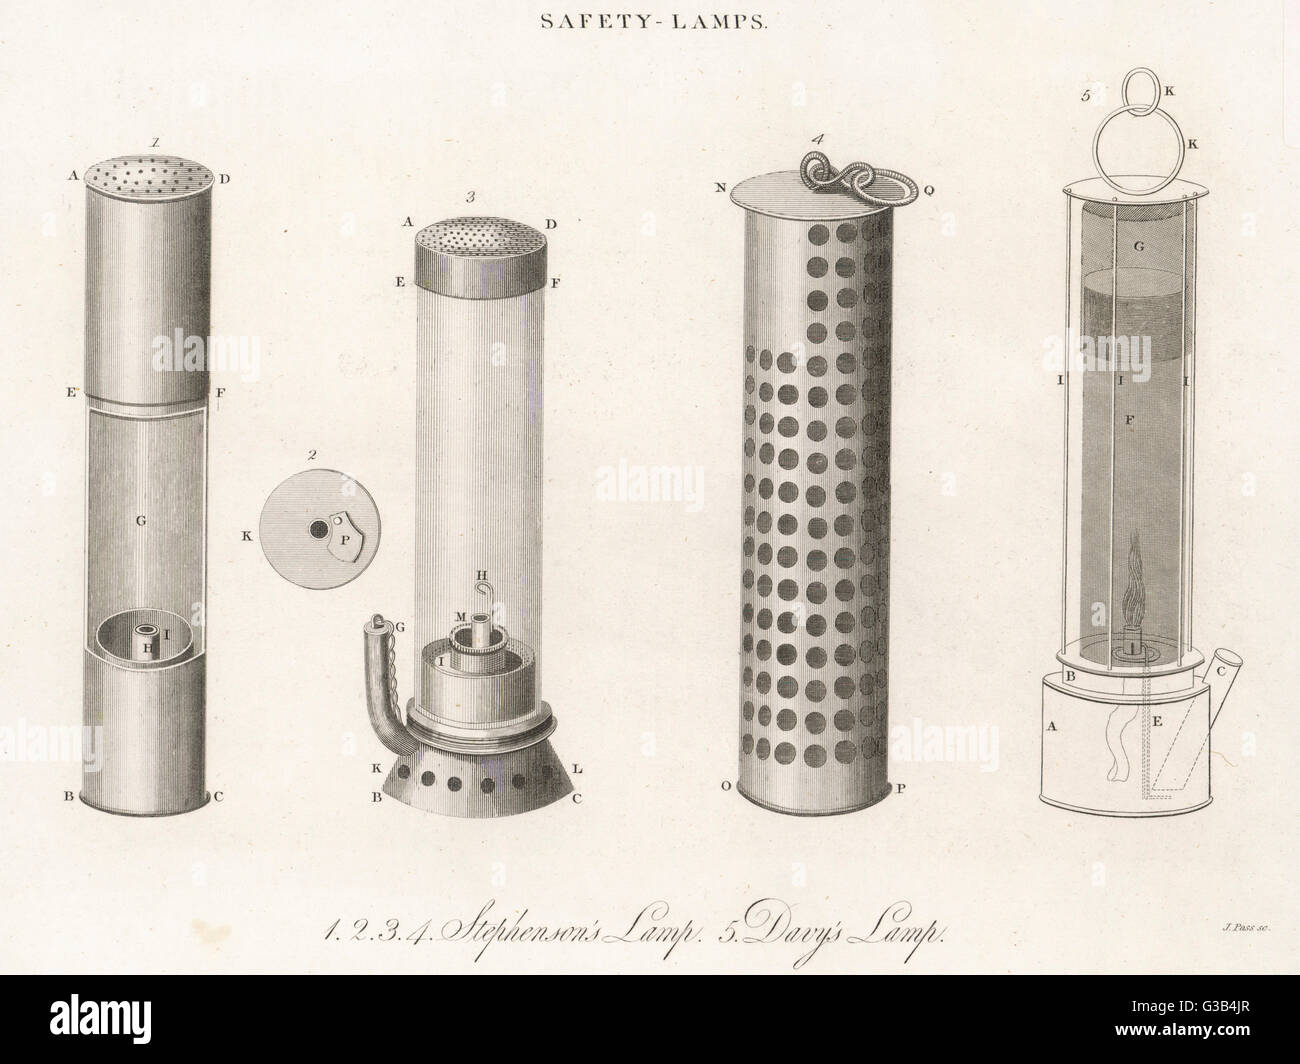 Diagrams showing the workings  of Stephenson's Lamp (1 - 4),  and Davy's Lamp (5, on the  right).       Date: 1826 Stock Photo